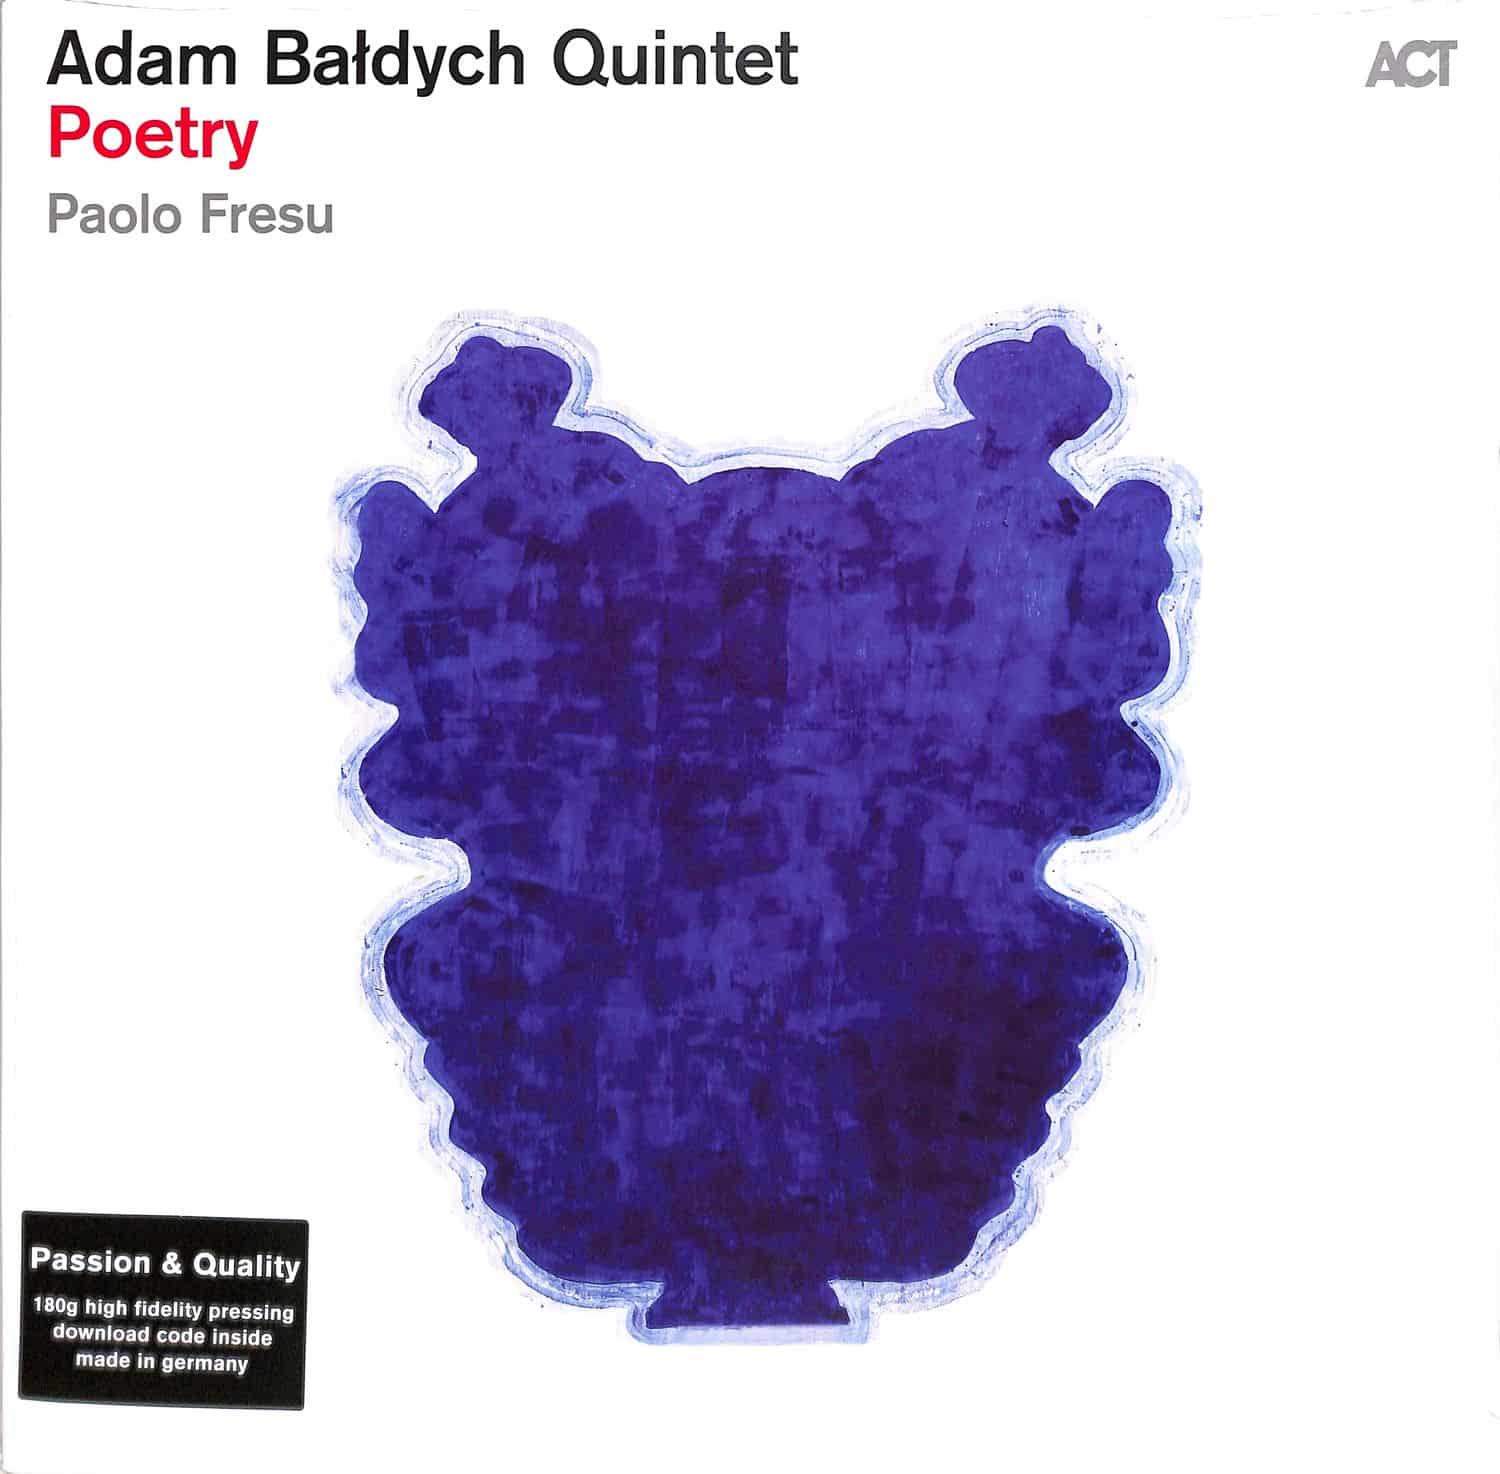 Adam Baldych Quintet with Paolo Fresu - POETRY 